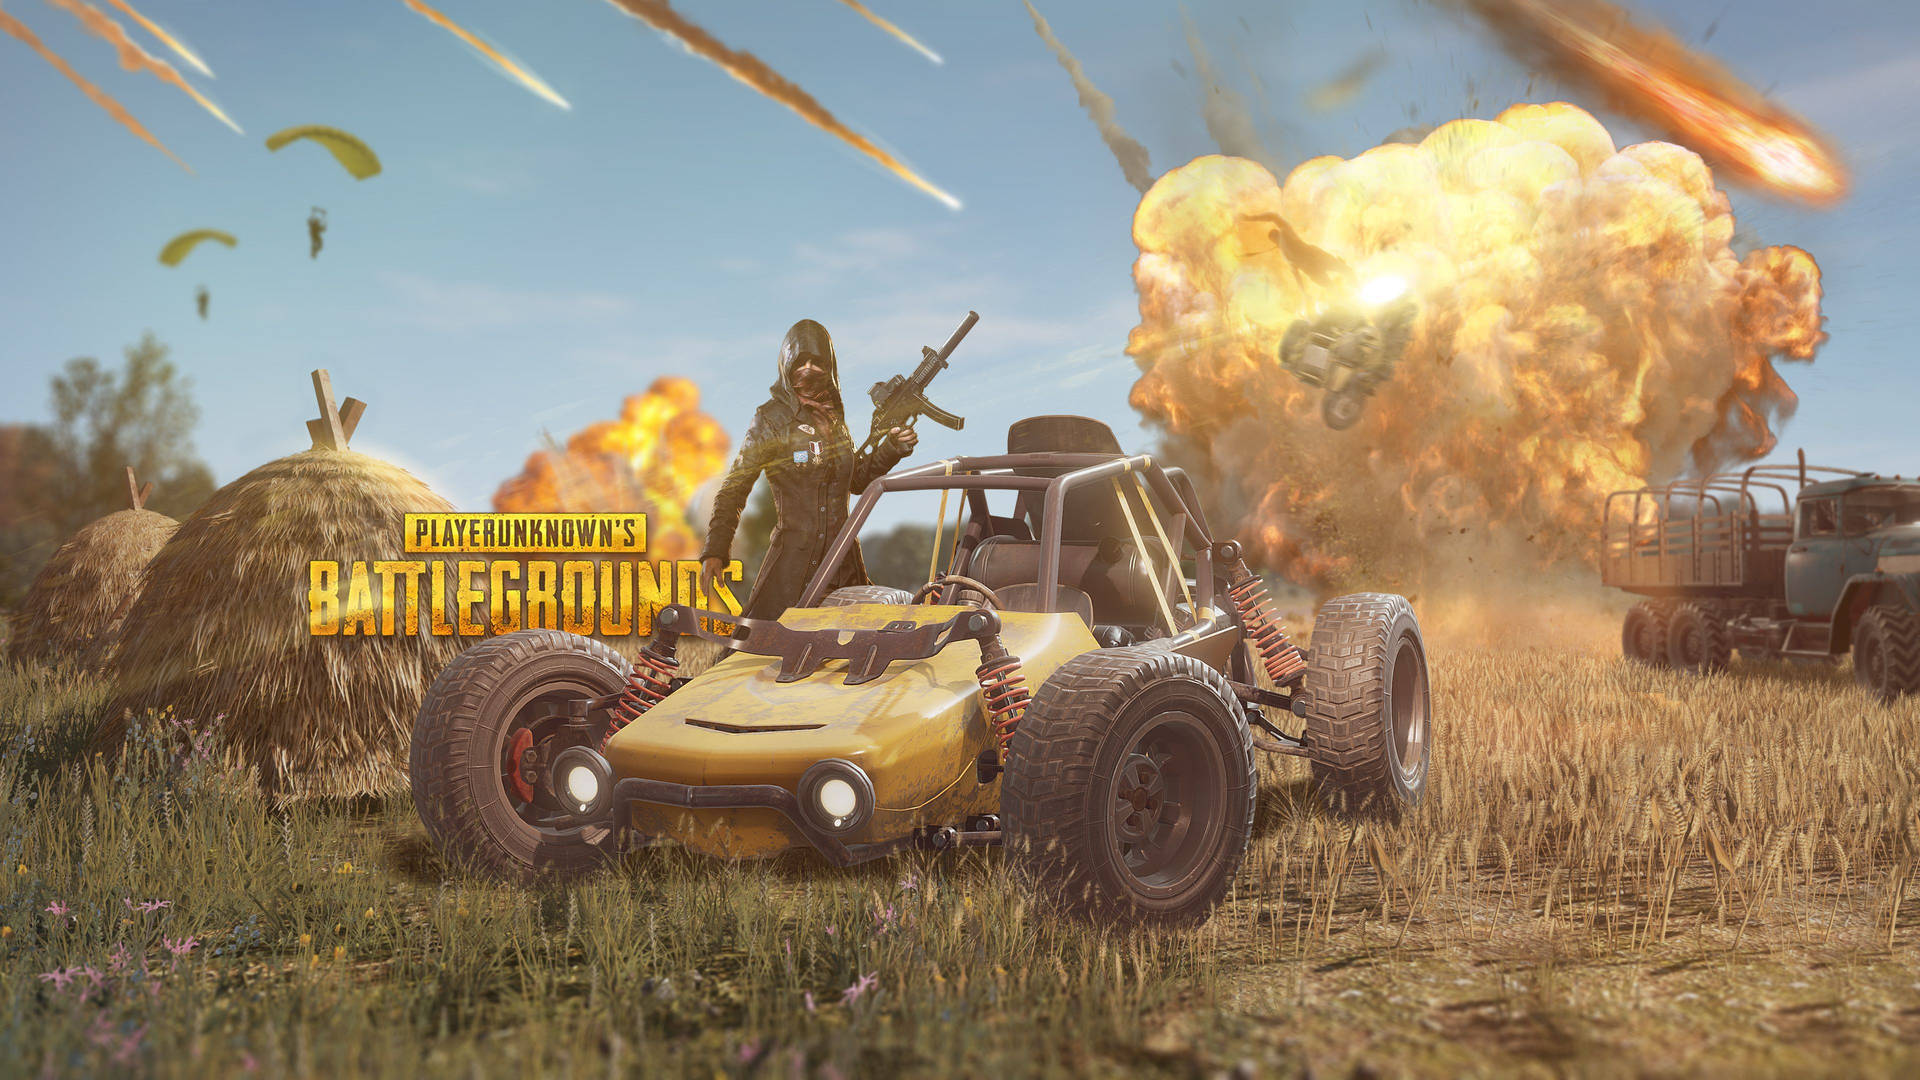 Ultra Hd Pubg Character And Vehicle Background